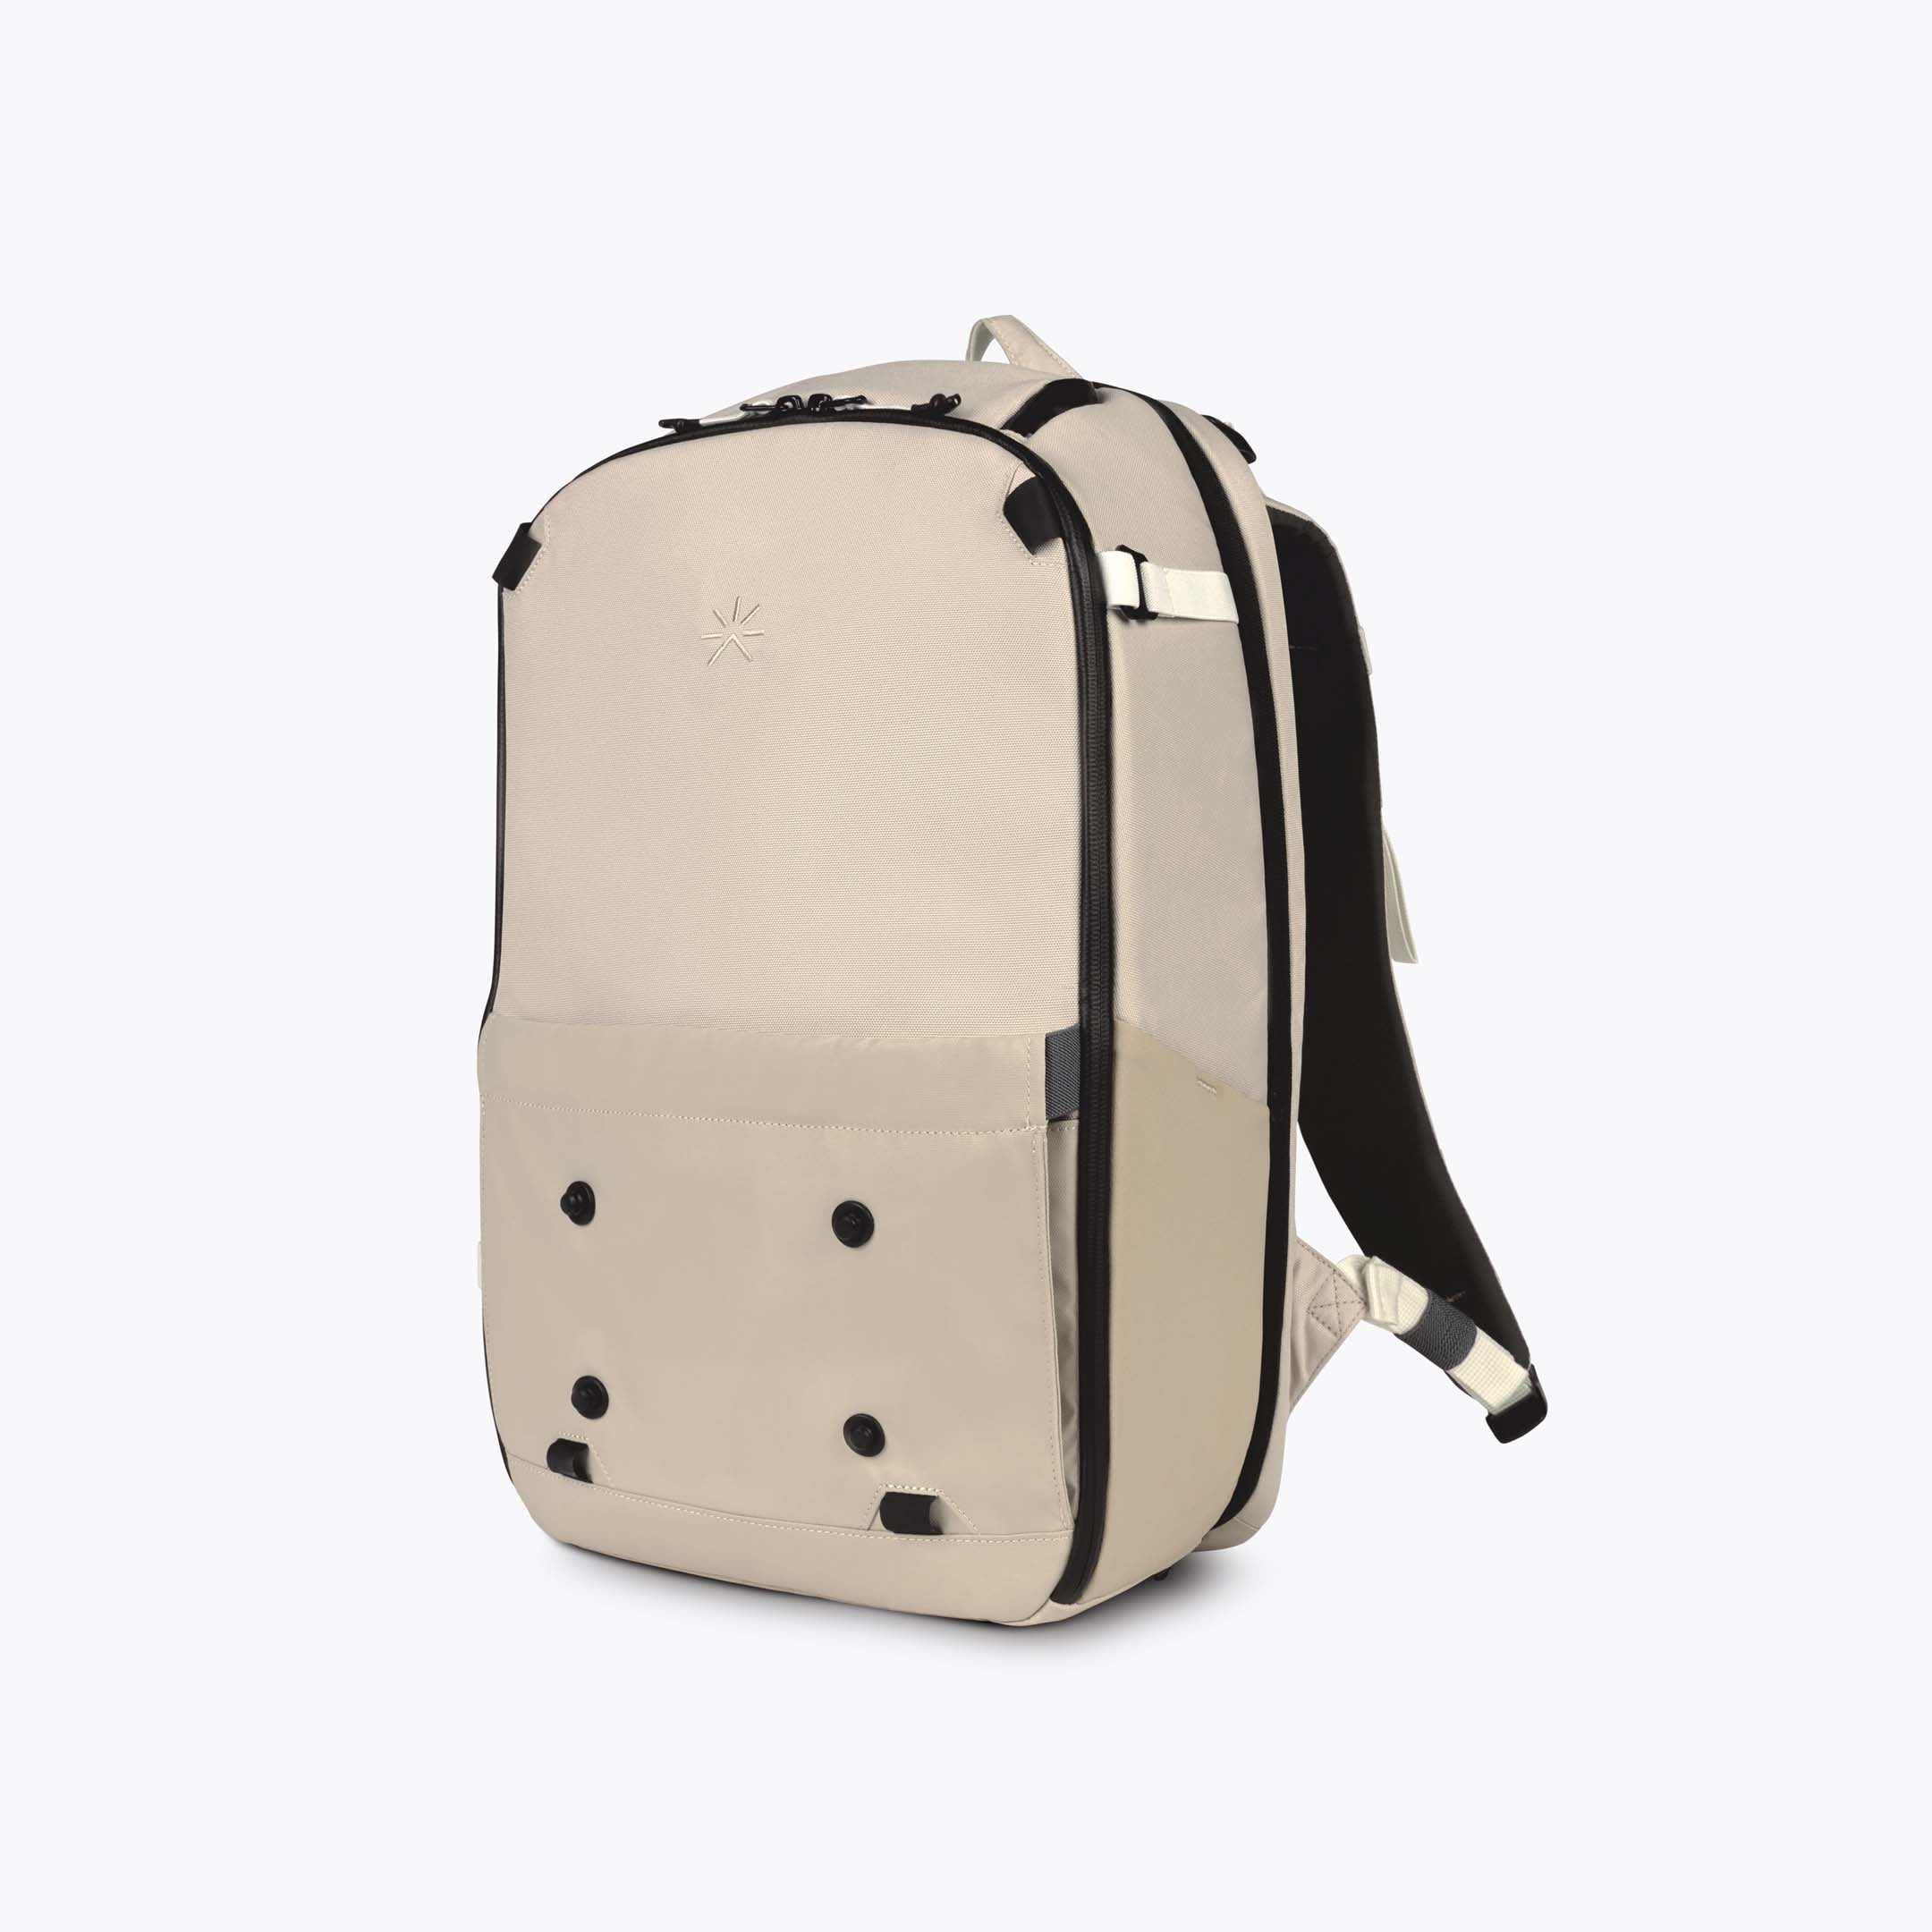 Tropicfeel Hive | The ready-to-adapt backpack